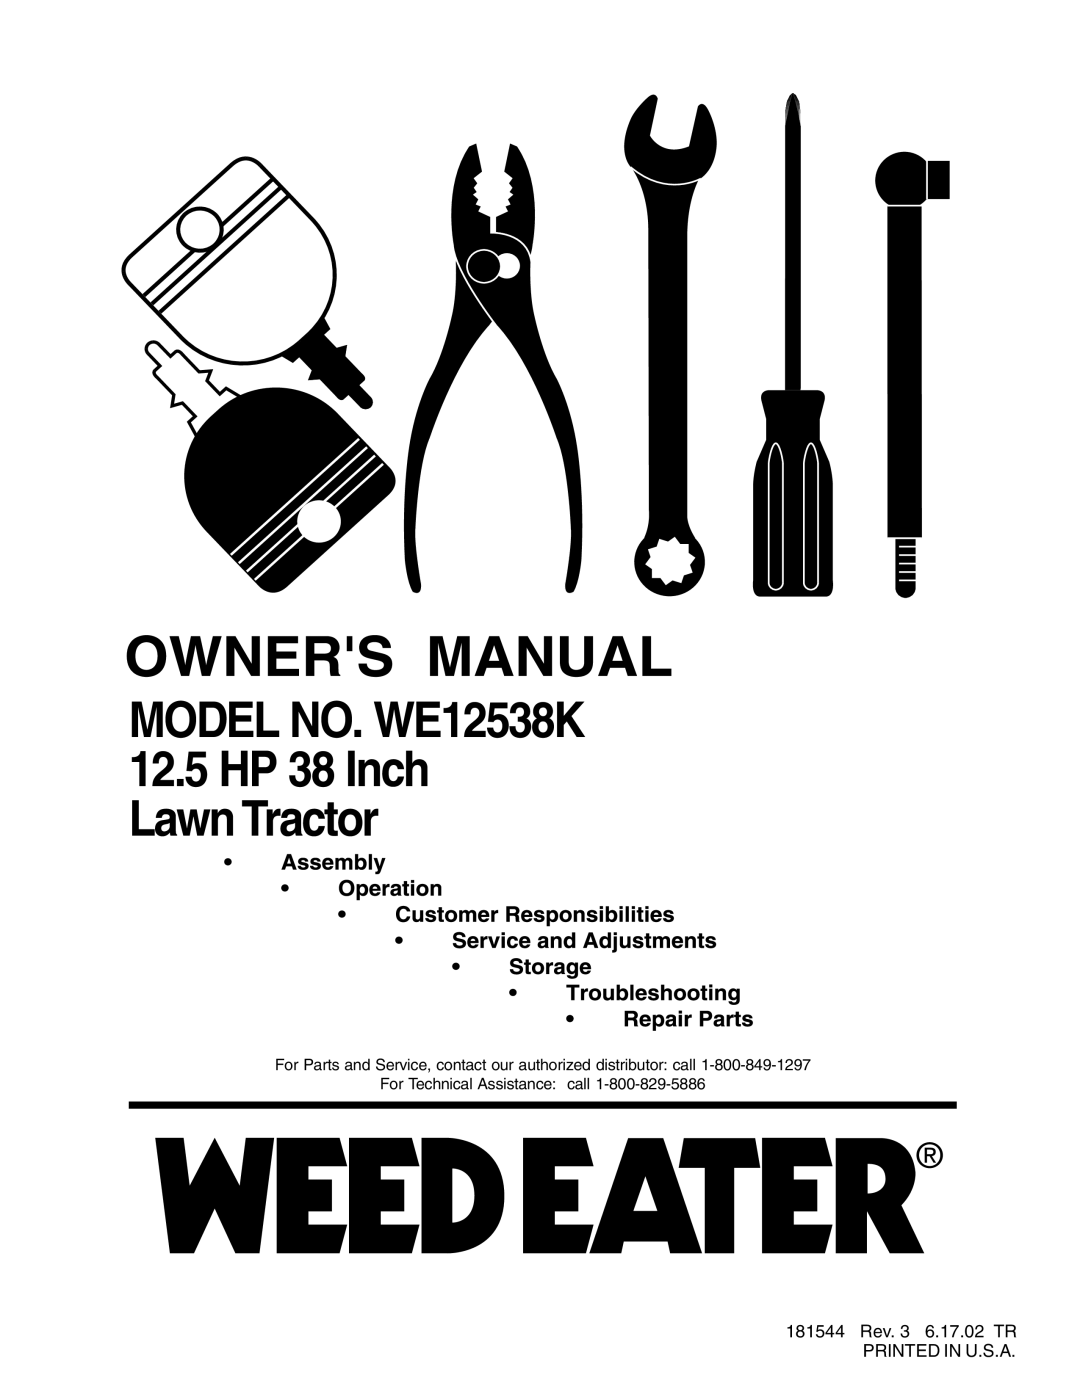 Weed Eater manual MODEL NO. WE12538K 12.5 HP 38 Inch Lawn Tractor 